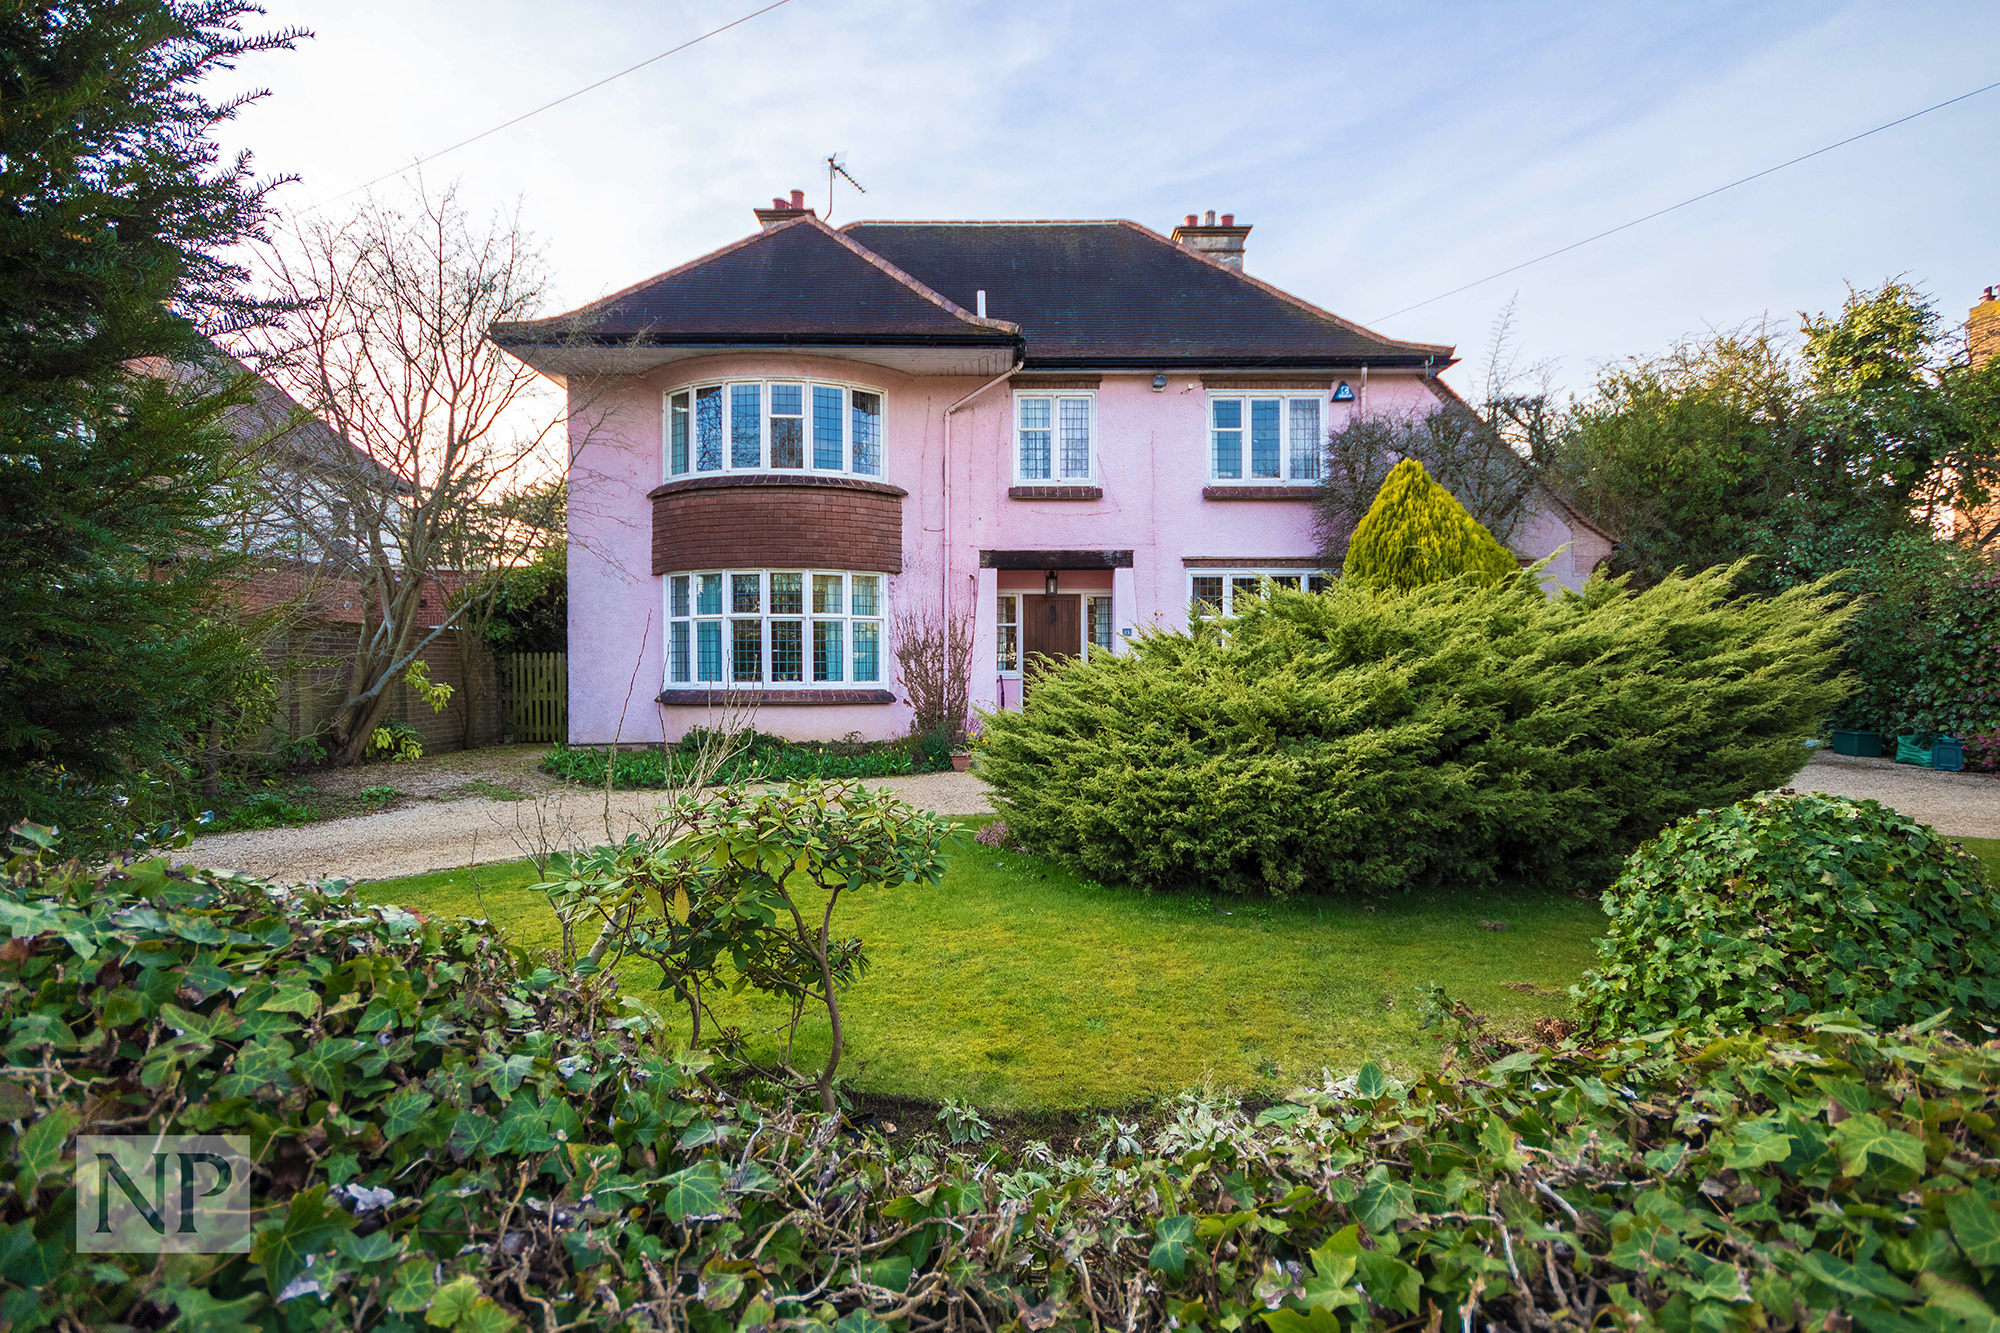 Fitzwalter road : Characterful Colchester homes for sale now 